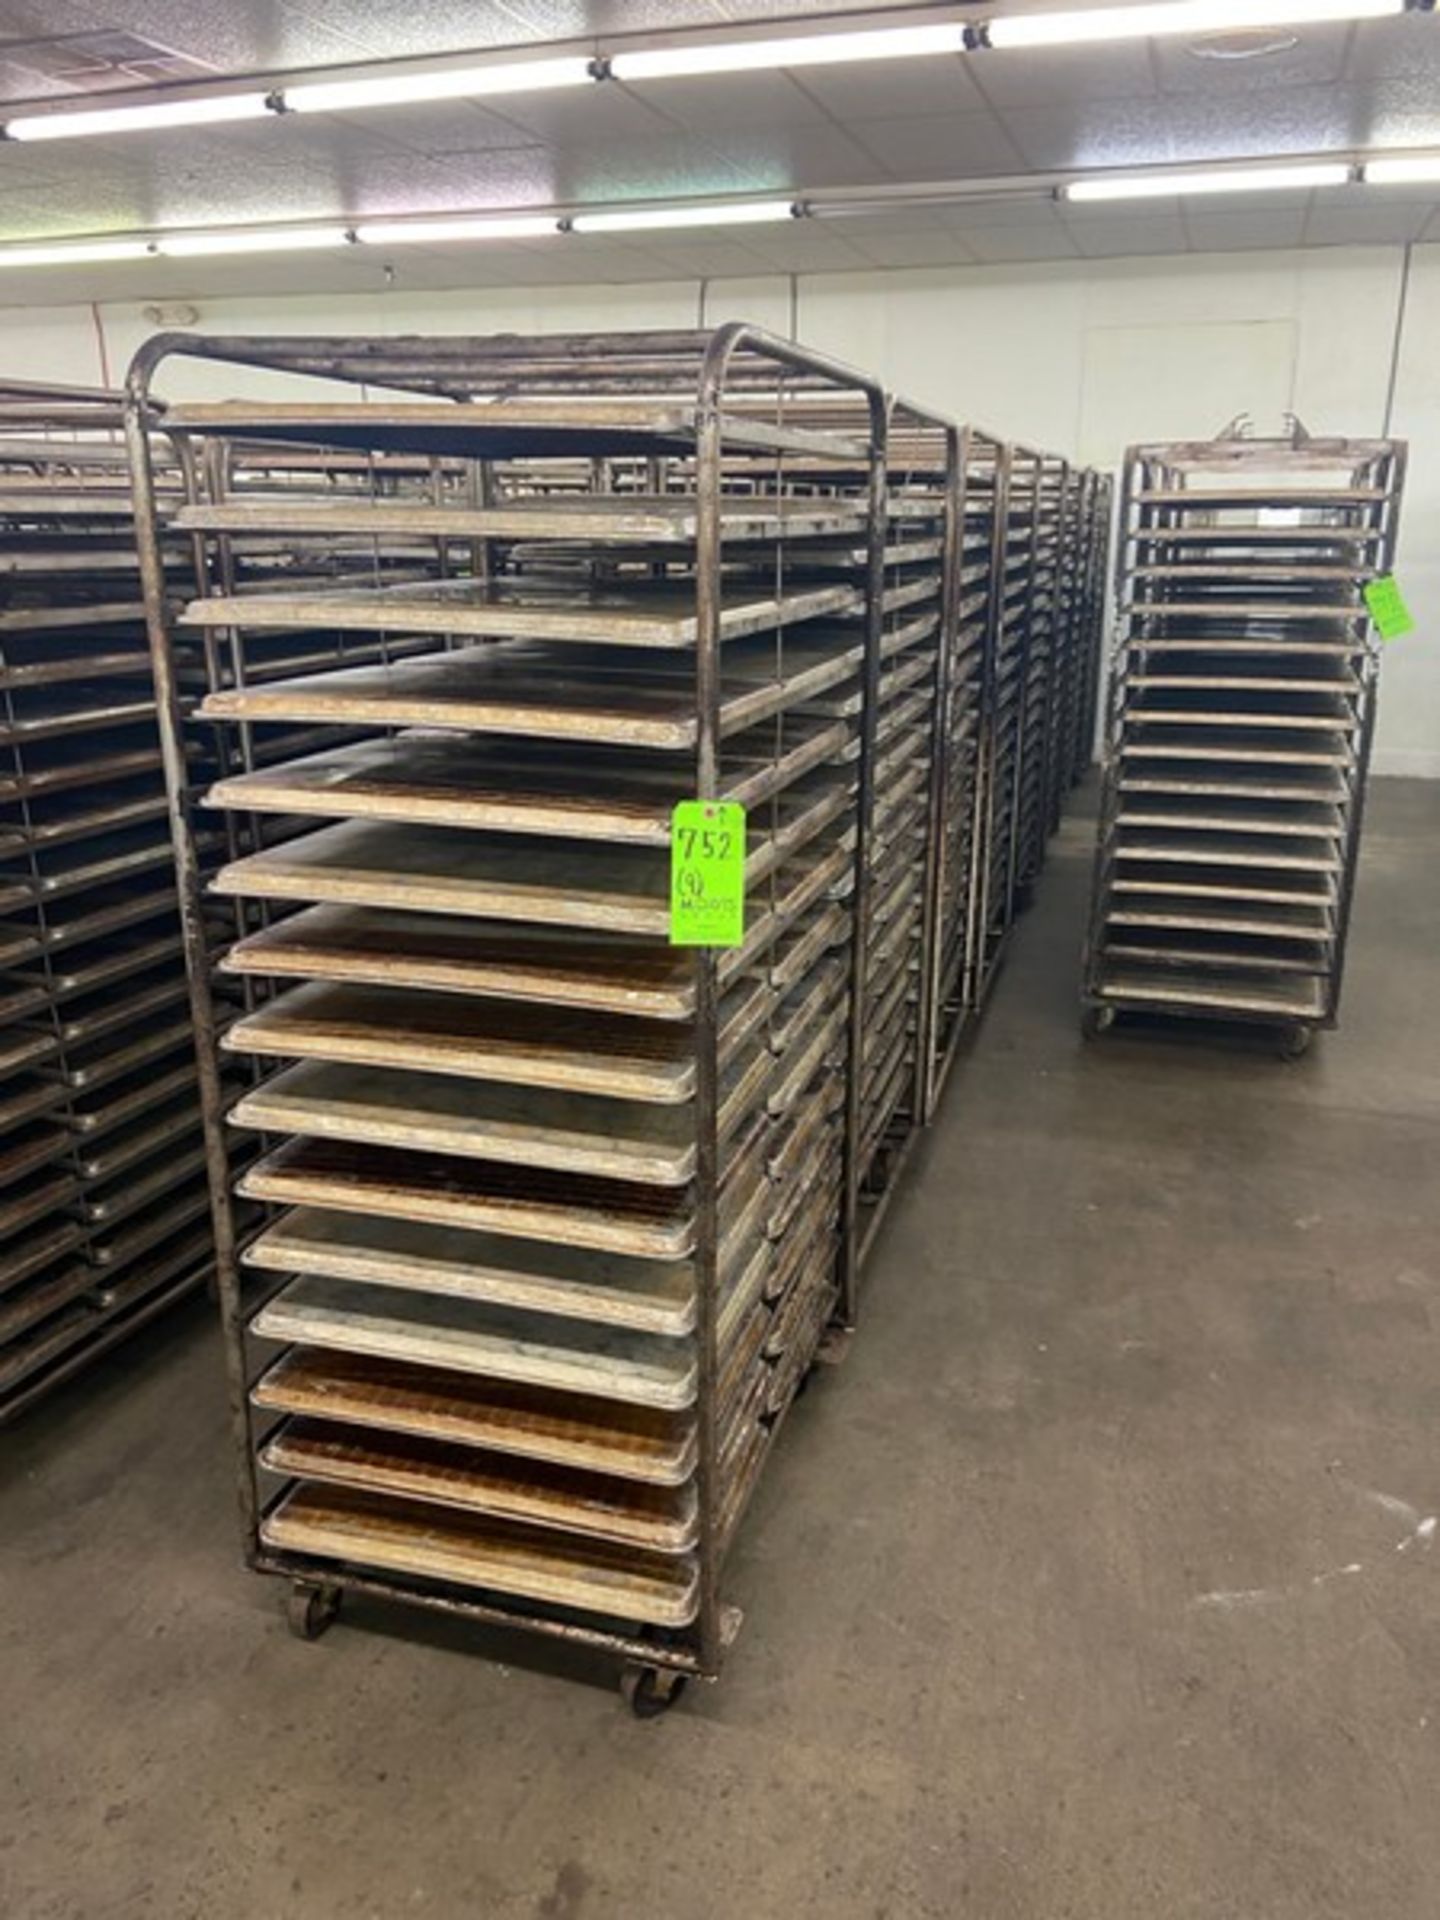 (9) PORTABLE DOUBLE SIDED BAKING PAN RACKS, MOUNTED ON CASTERS (LOCATED IN HERMITAGE, PA)